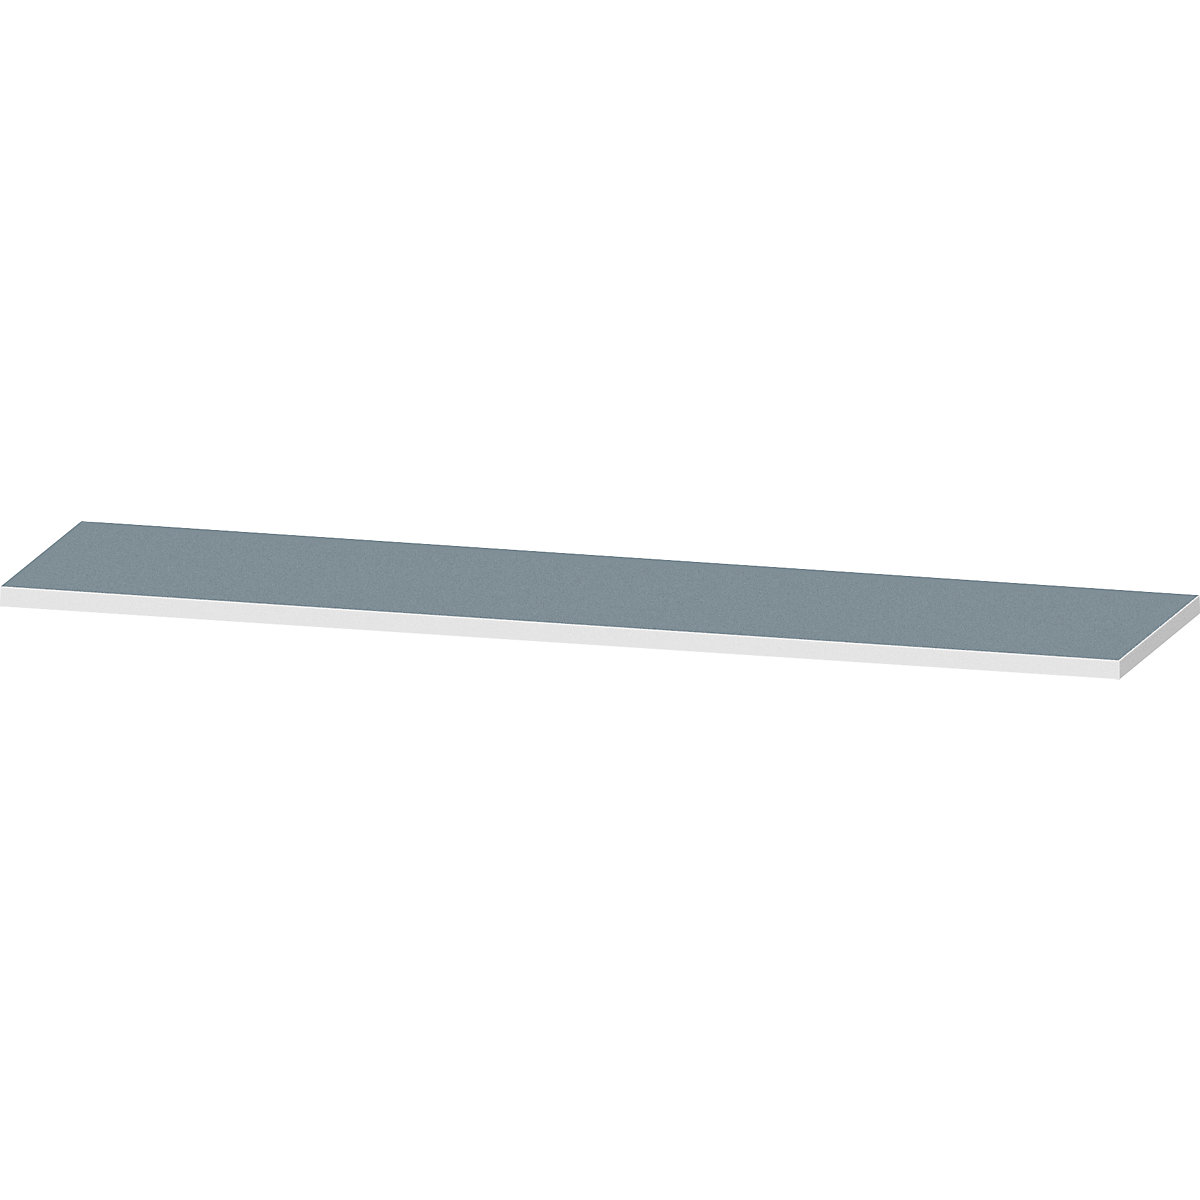 Worktop for workbench – ANKE, worktop with universal cover, width 2800 mm, thickness 50 mm-8